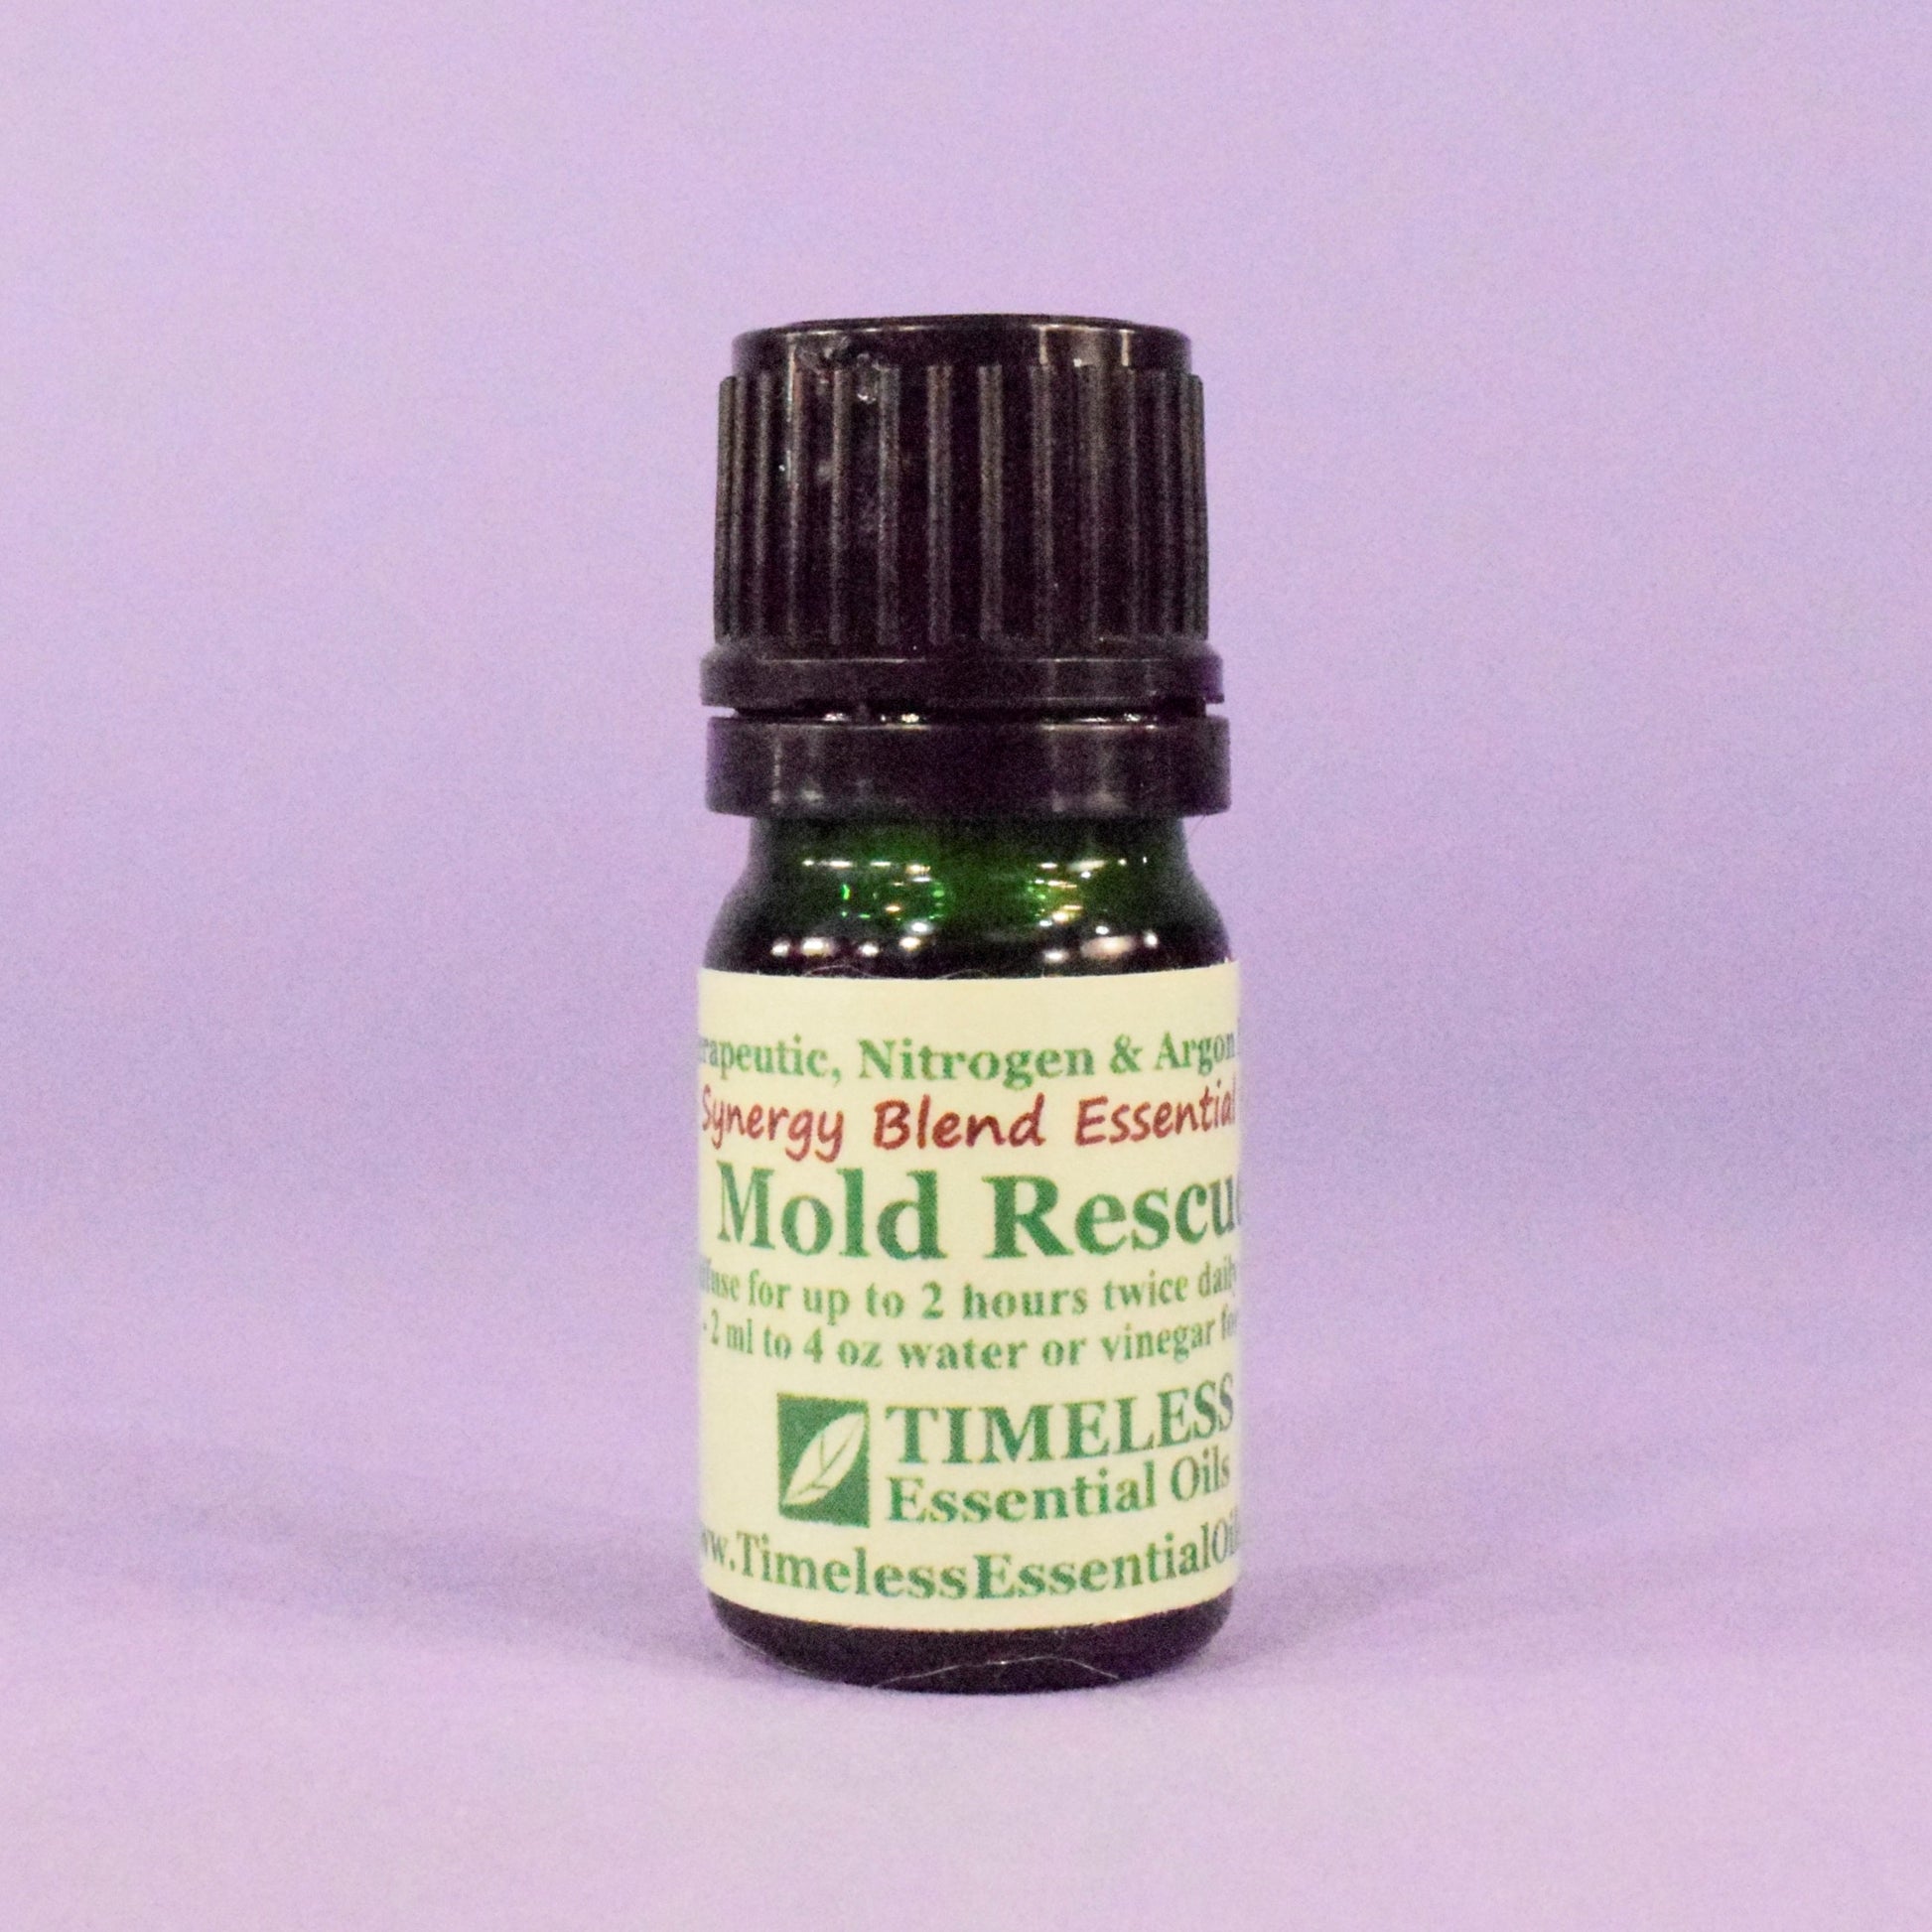 TIMELESS Essential Oils Mold Rescue Synergy Blend helps eliminate musty household odors and reduce mold spores